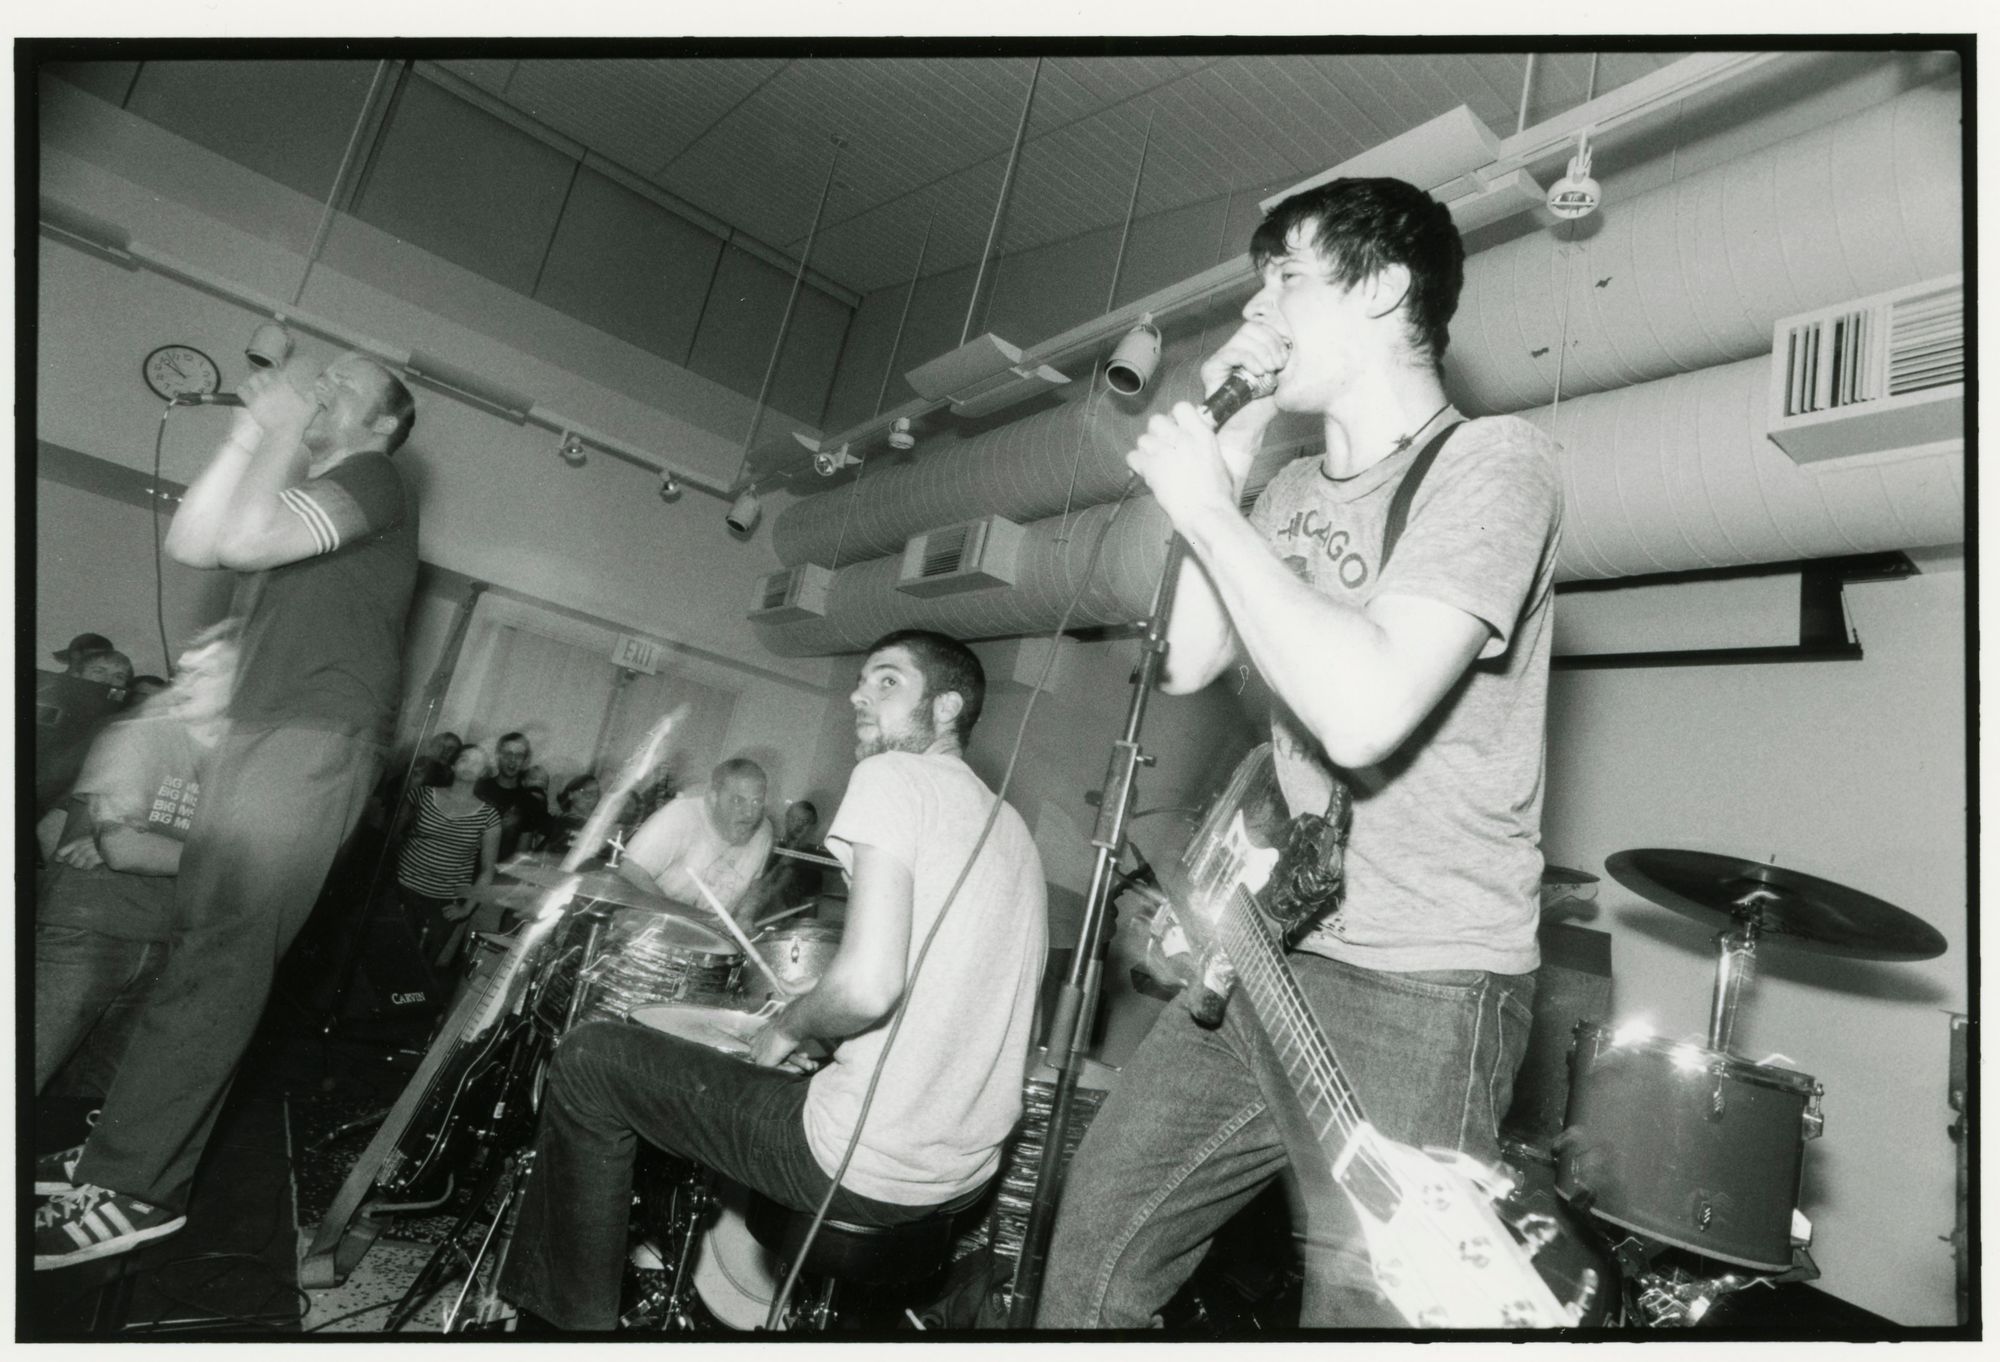 A black and white film photograph of a punk band playing a show.